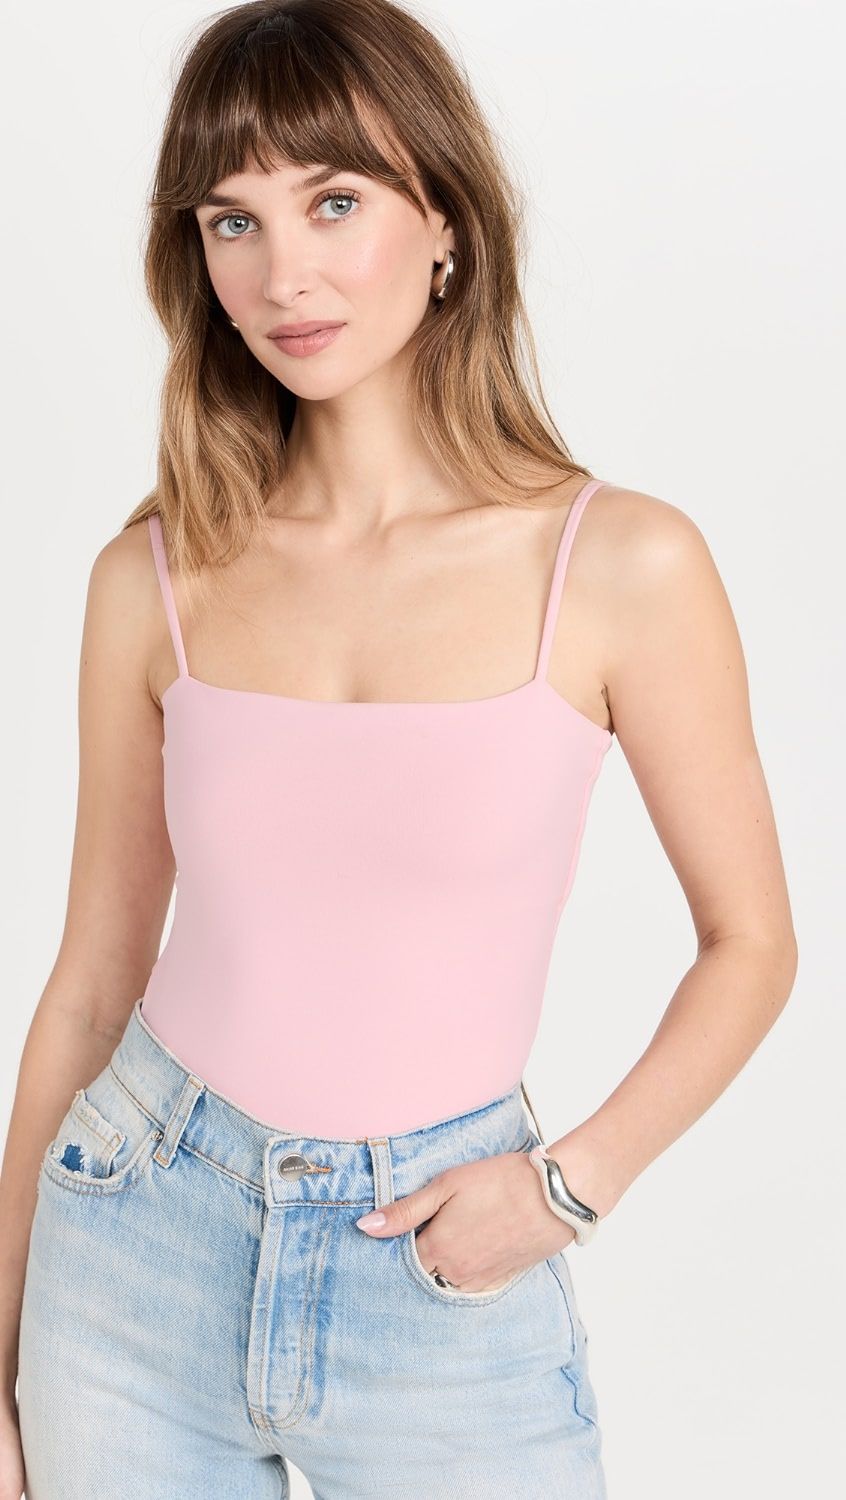 Straight String Top 5" | Shopbop